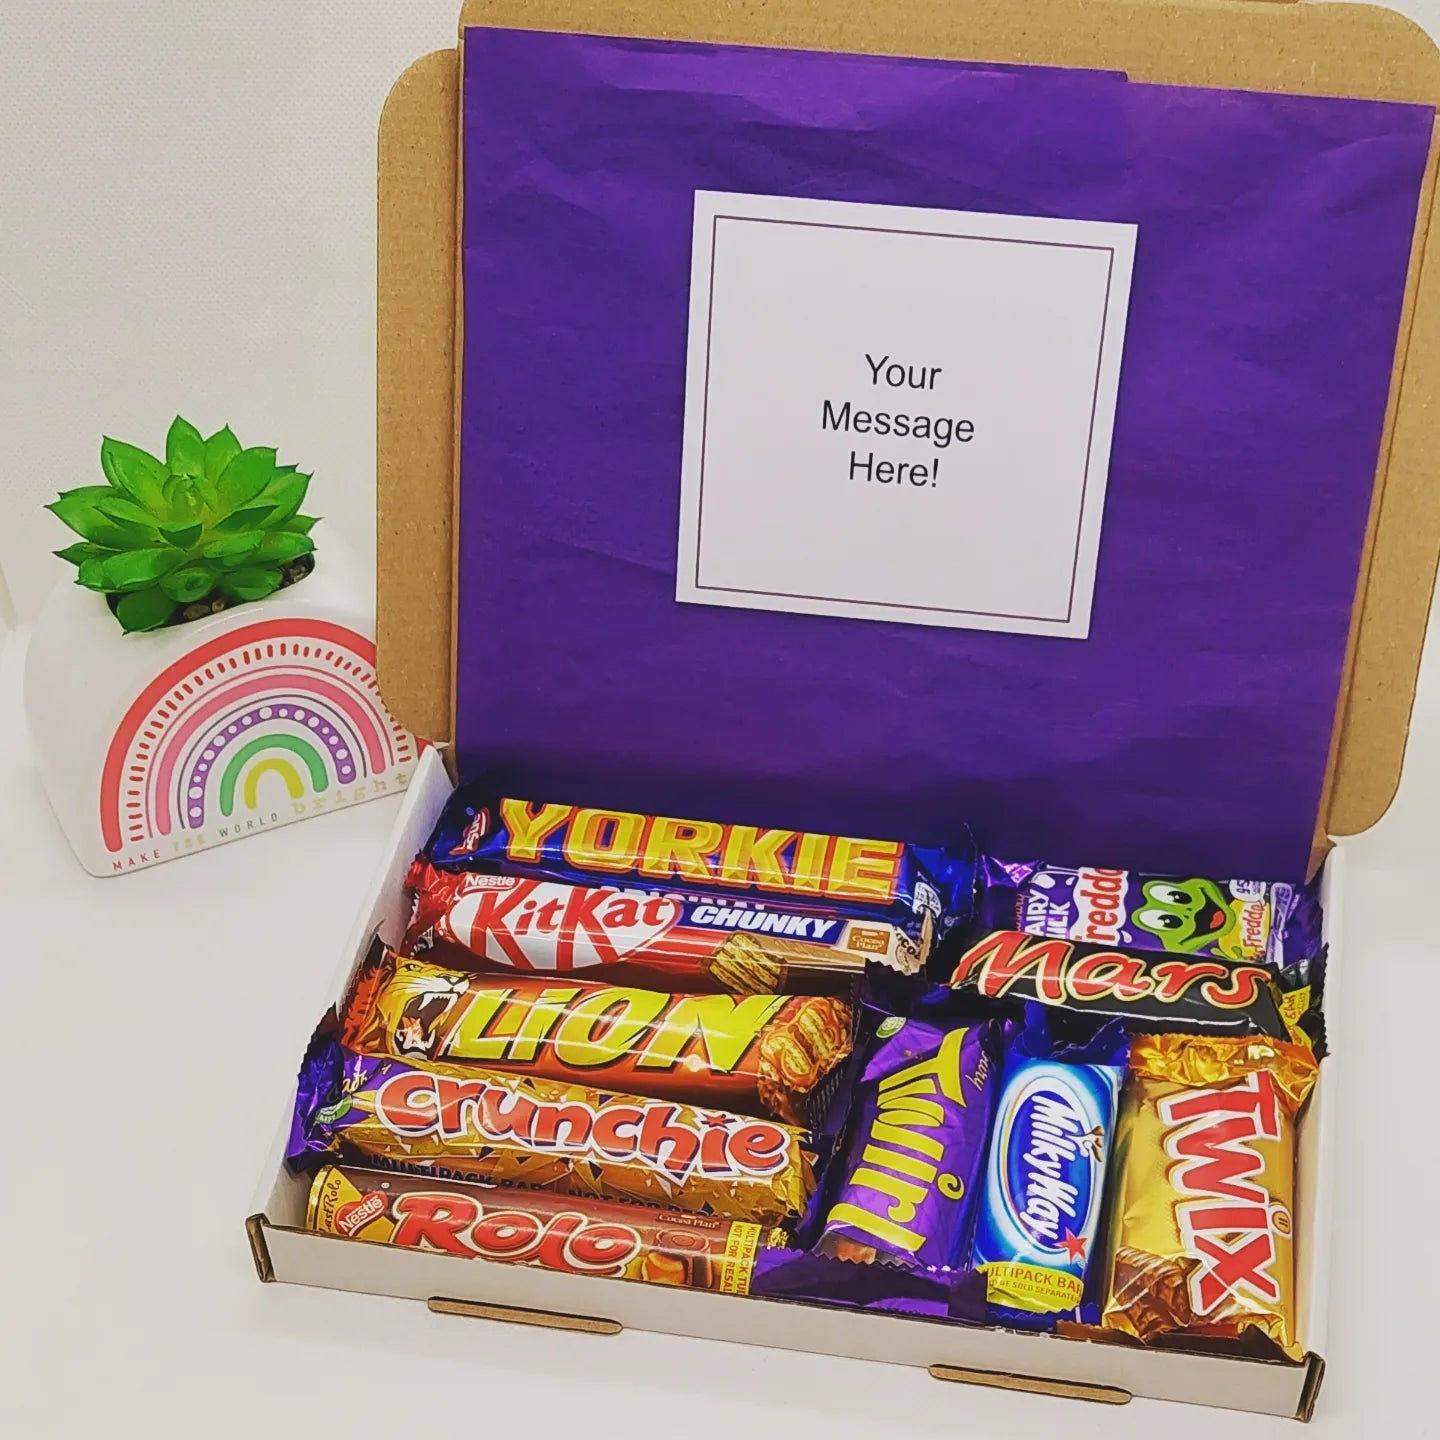 Chocolate Letterbox Gift – The Happiness Box